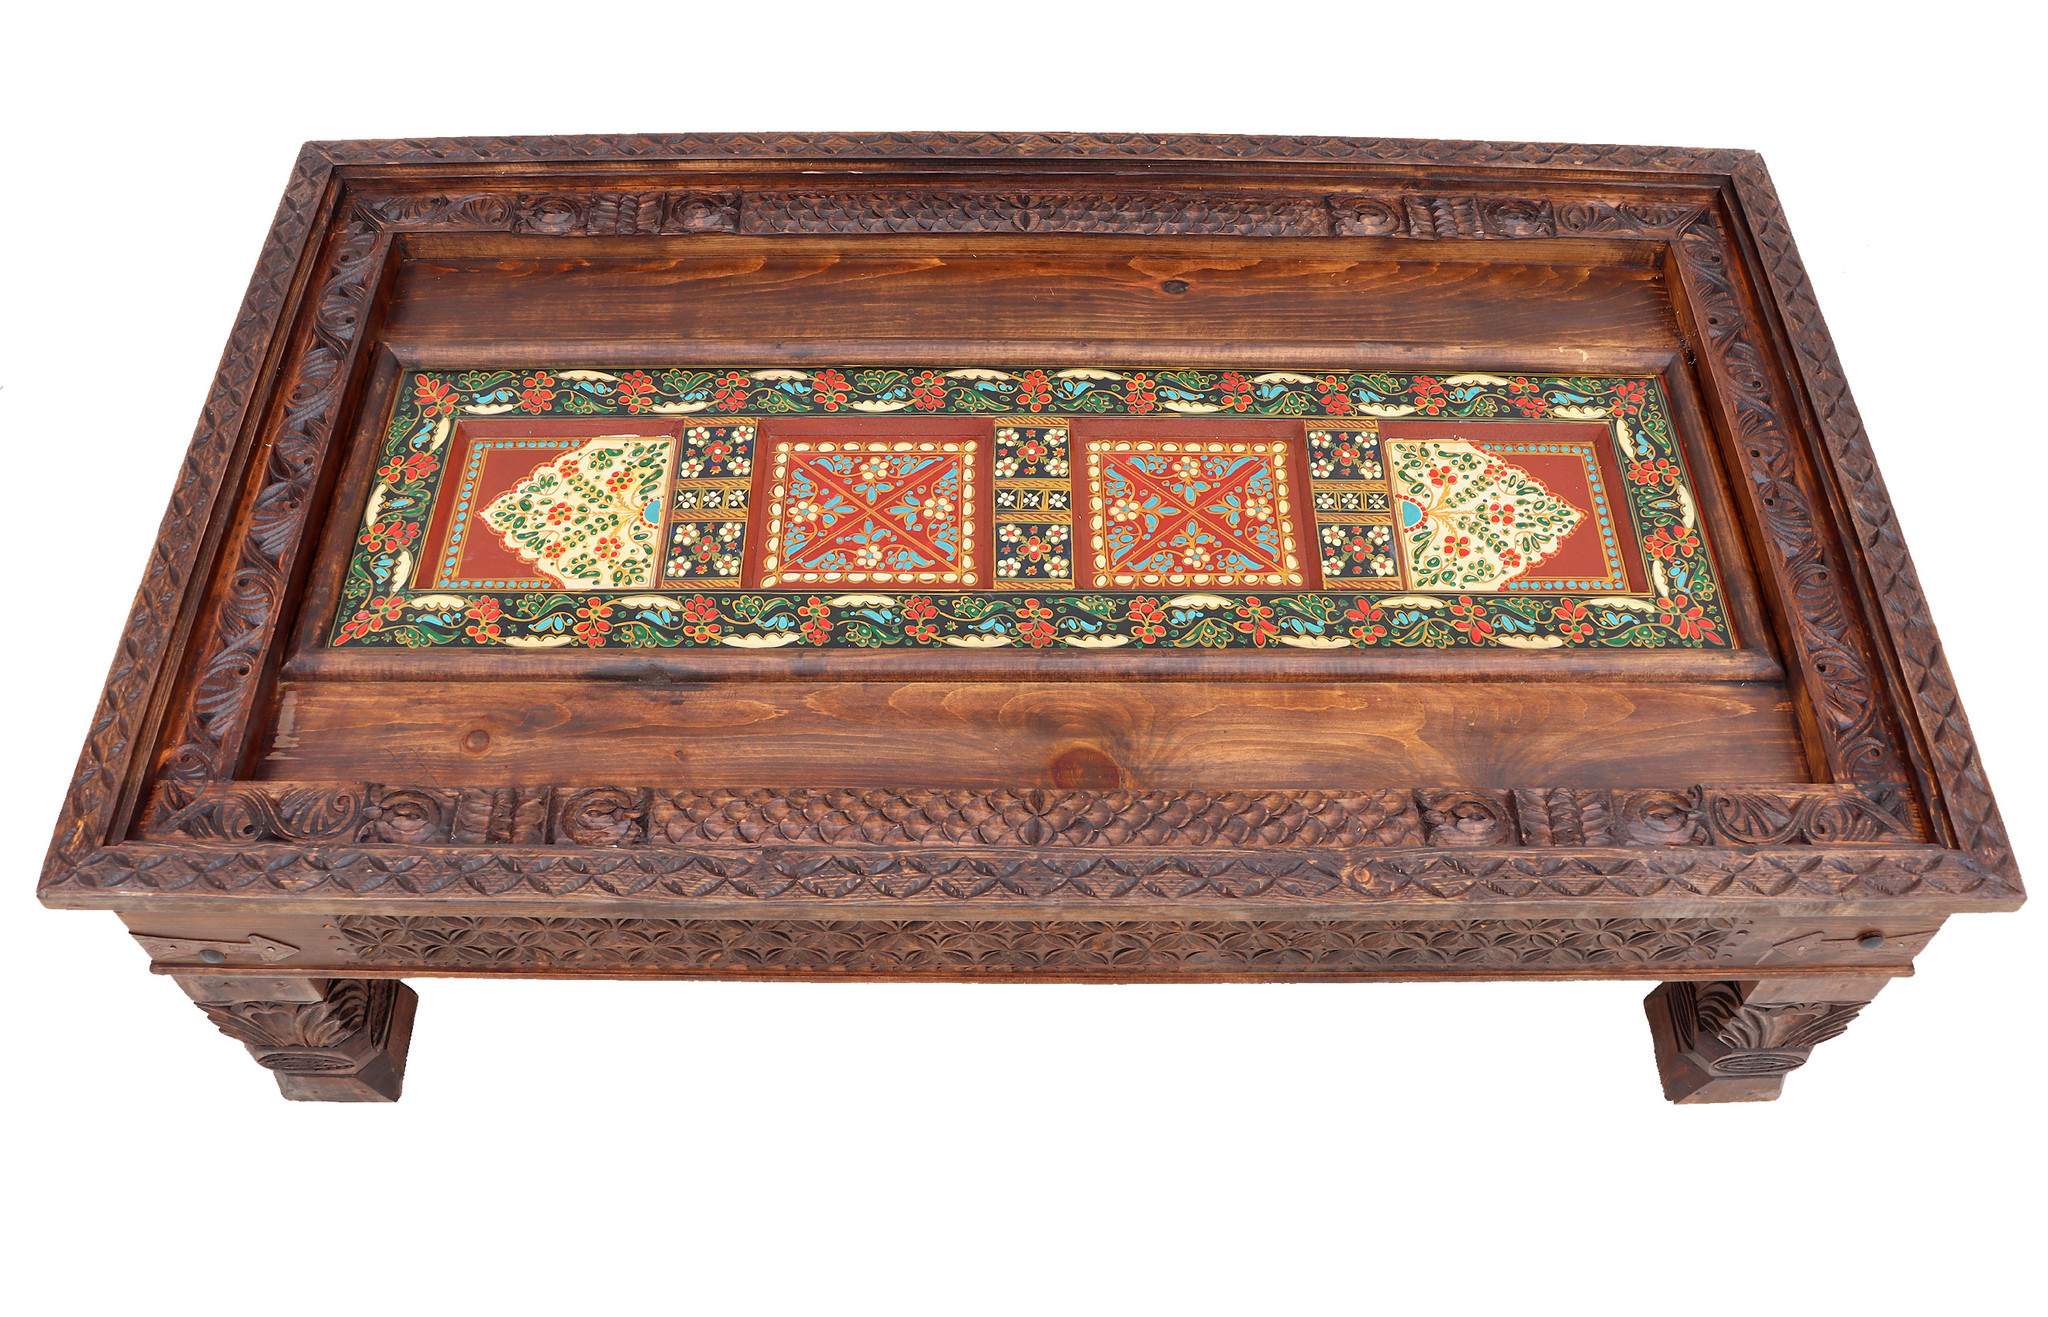 153x90 cm cm antique-look orient colonial solid wood hand-carved  table  Coffee Table   from Afghanistan nuristan 23-BB